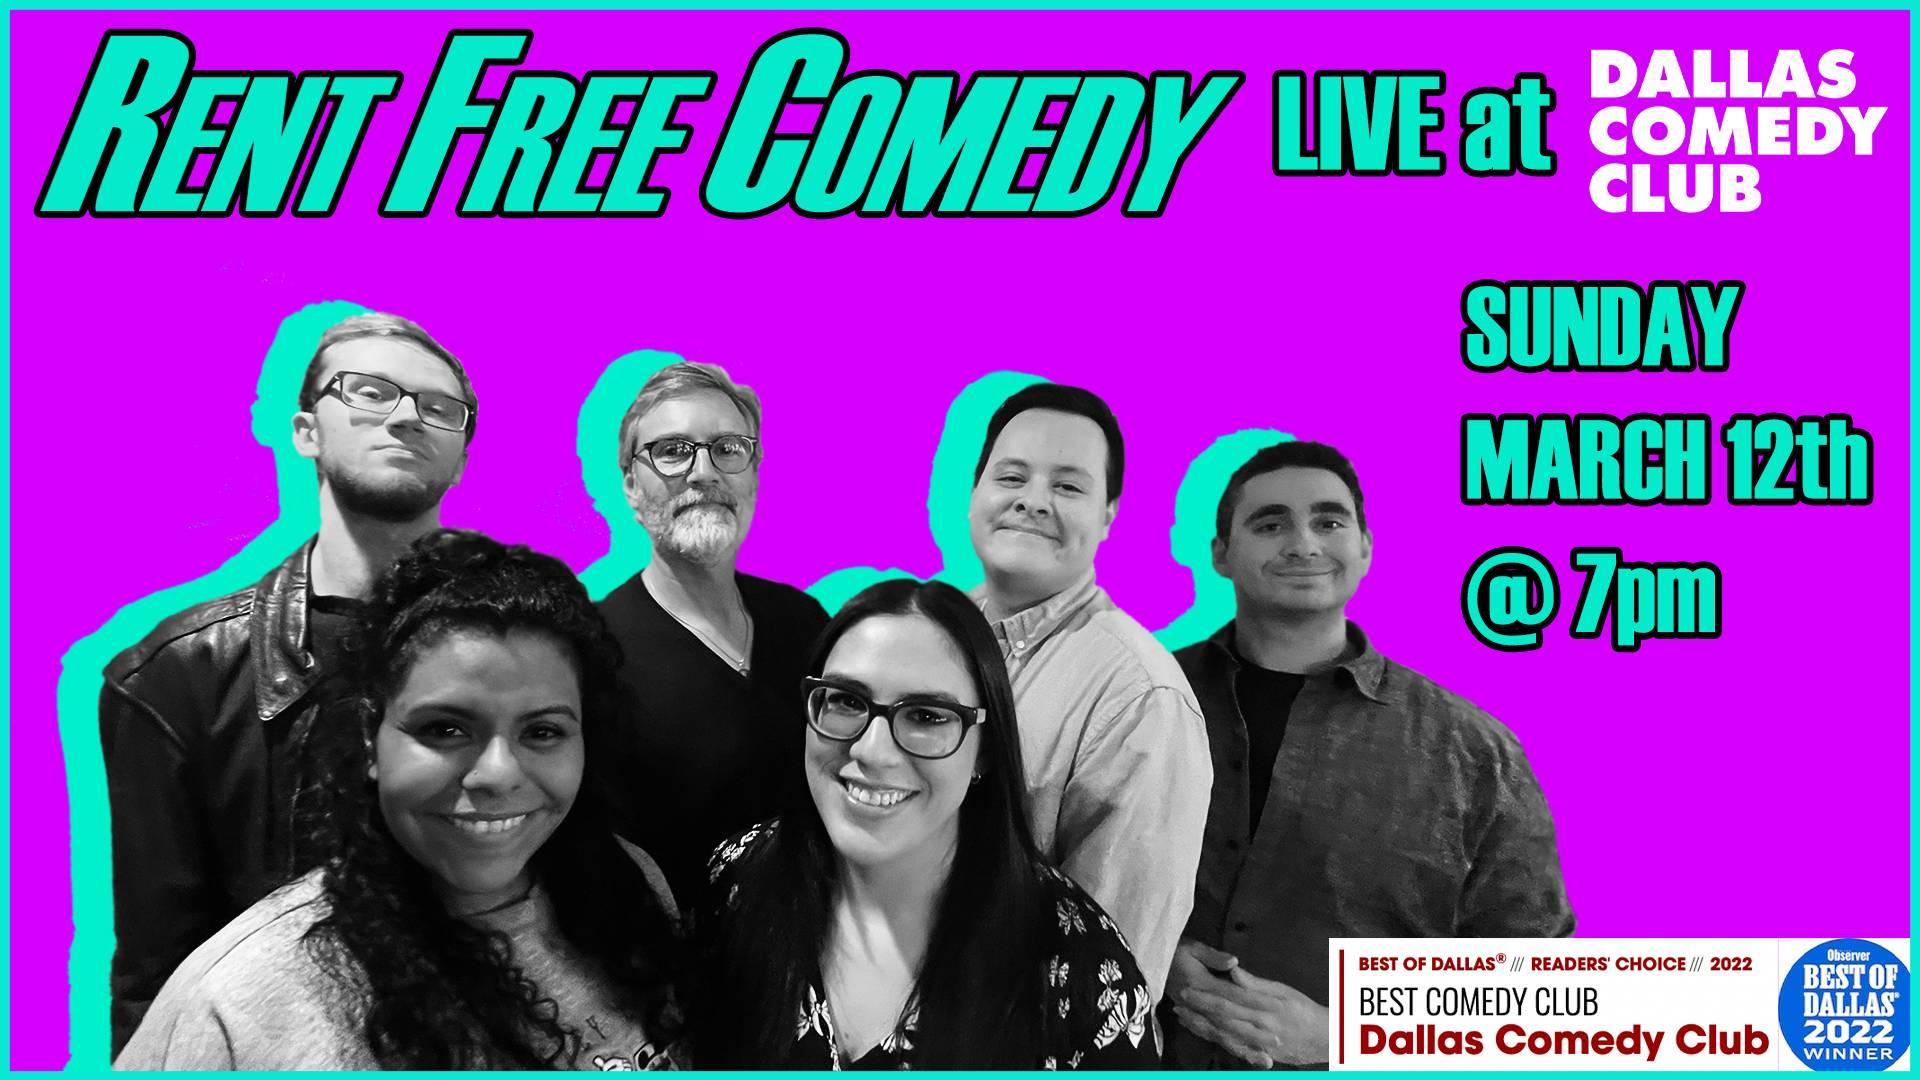 Rent Free Comedy presents... Out of Left Field: A Sketch Comedy Show